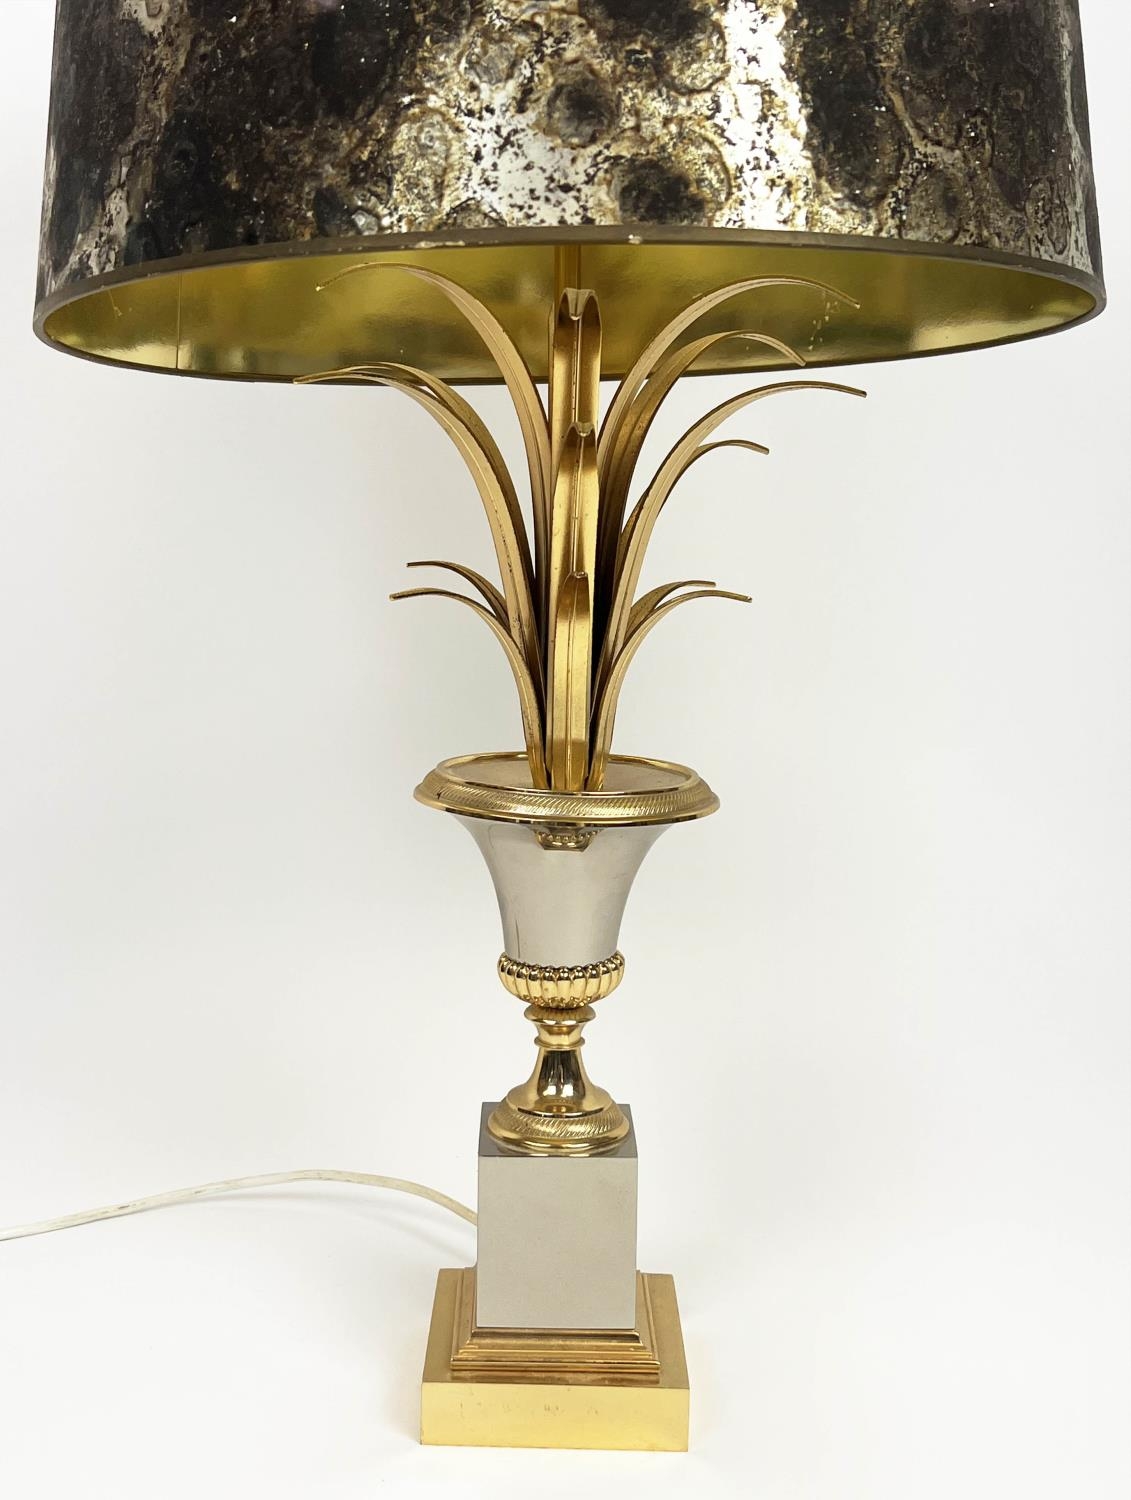 ATTRIBUTED TO MAISON CHARLES TABLE LAMP, French circa 1965, ormolu with original marbled shade, 75cm - Image 6 of 6